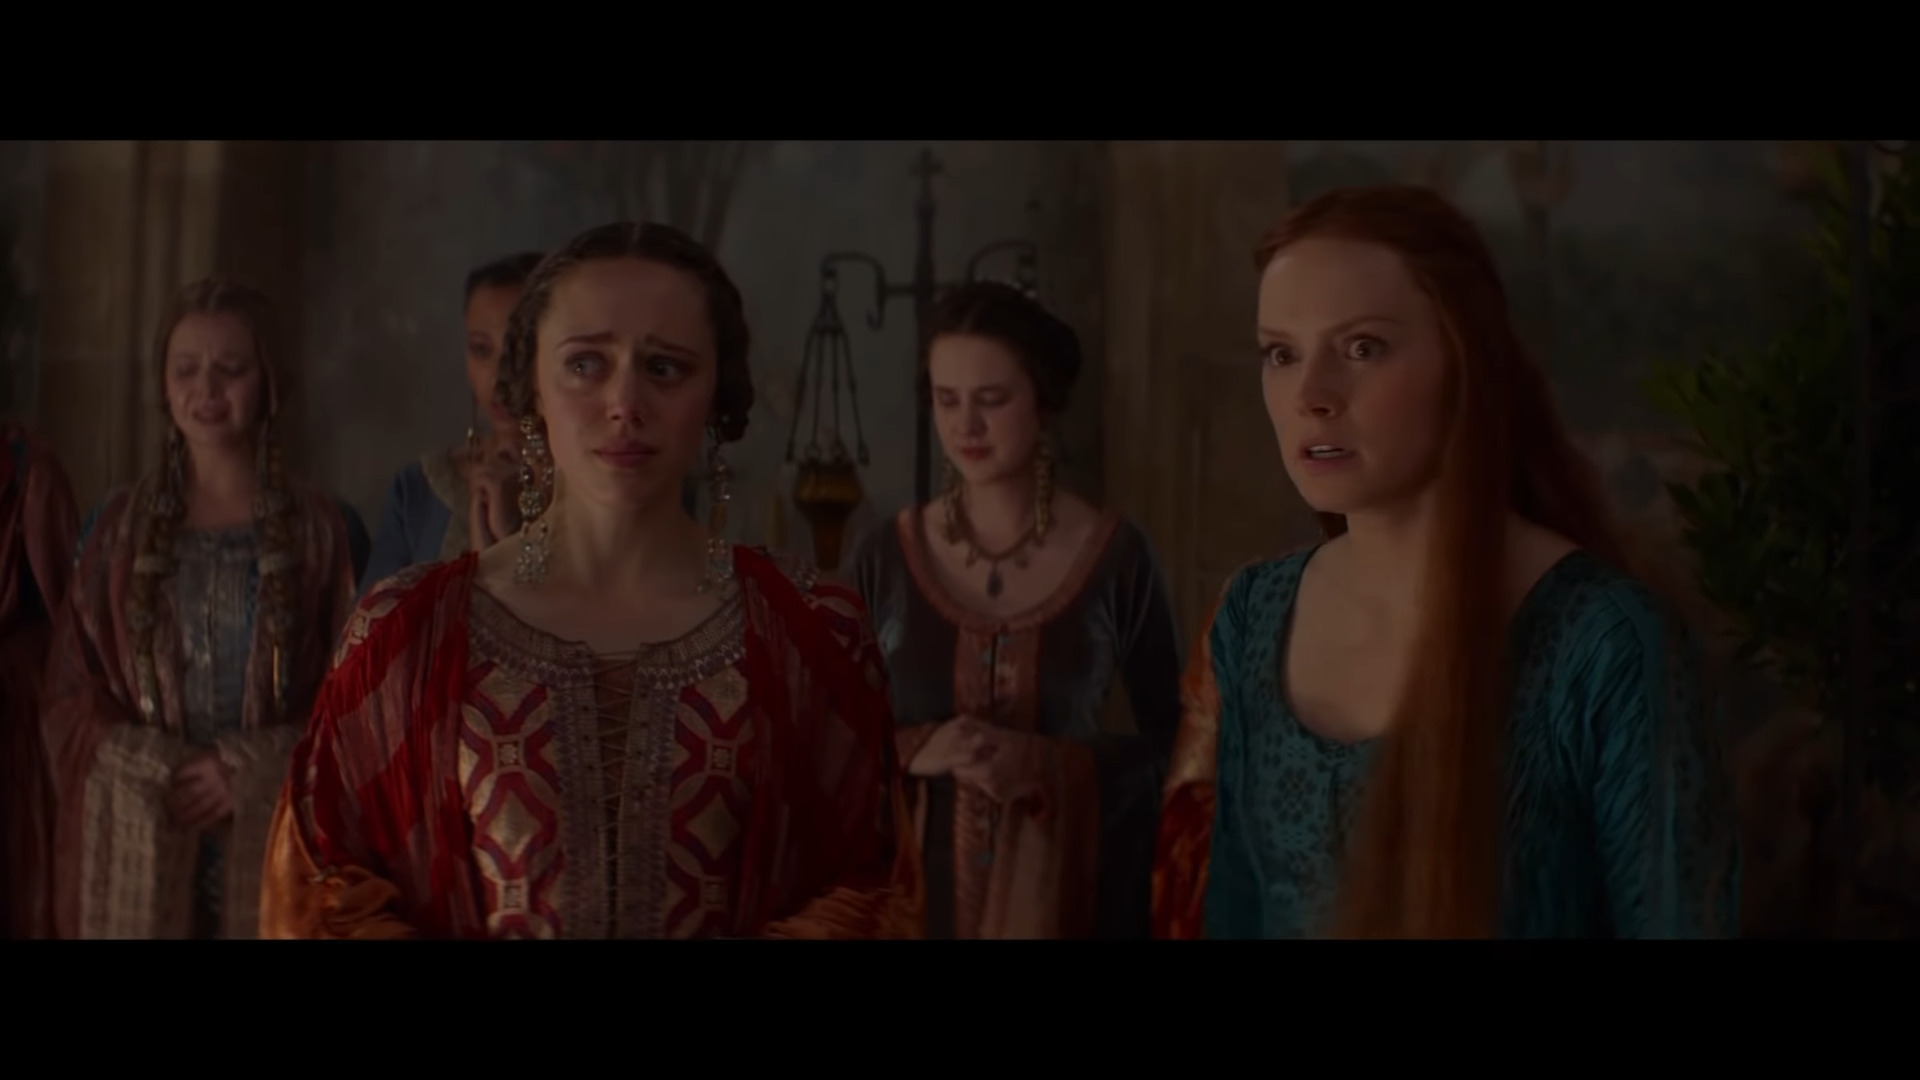 Ophelia (Daisy Ridley) learns of King Hamlet's (Nathaniel Parker) death in Ophelia (2018), Covert Media